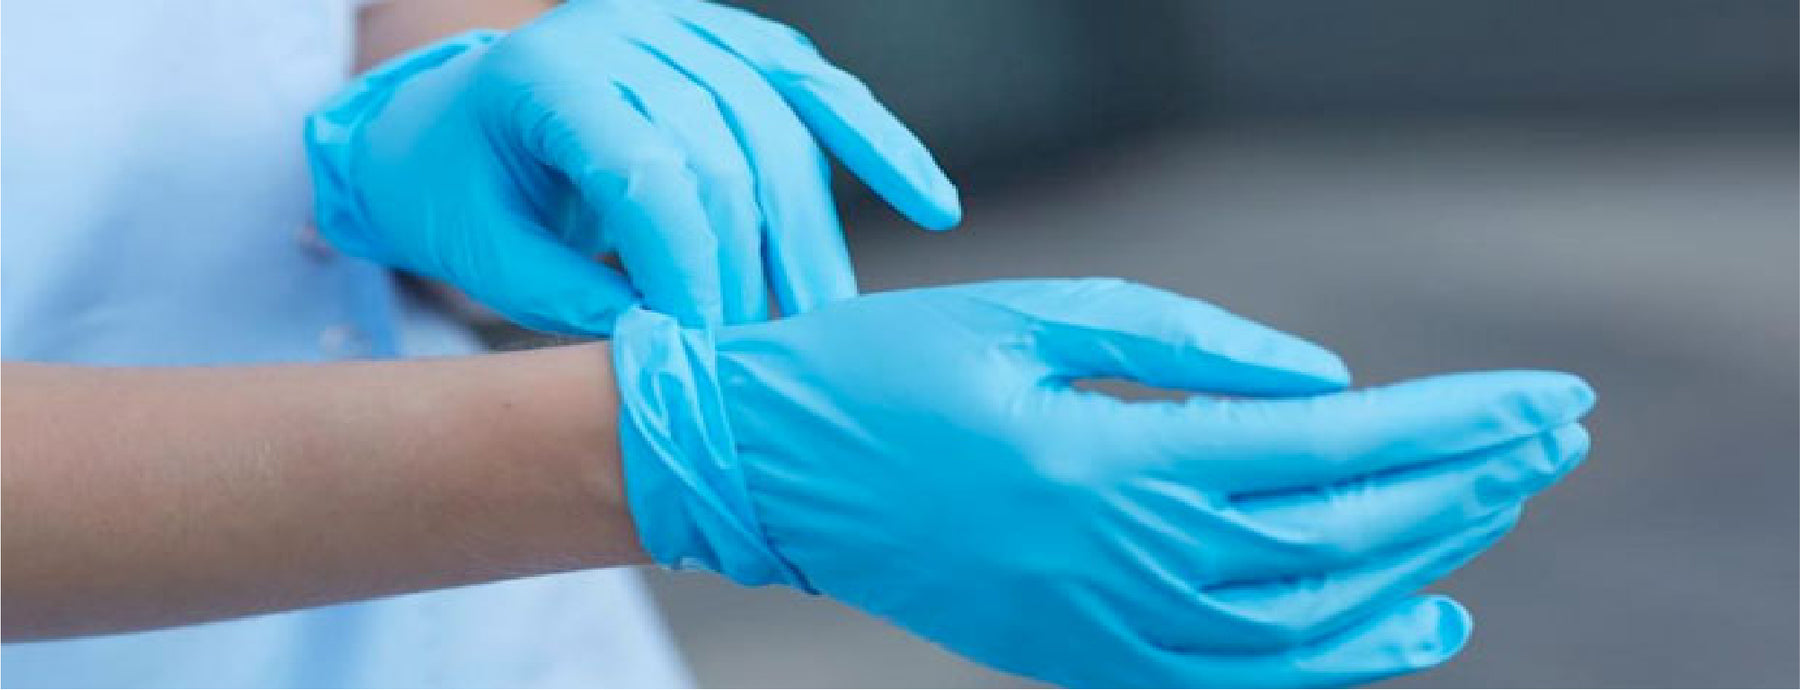 Packman: The Role and Importance of Disposable Gloves in Today’s World